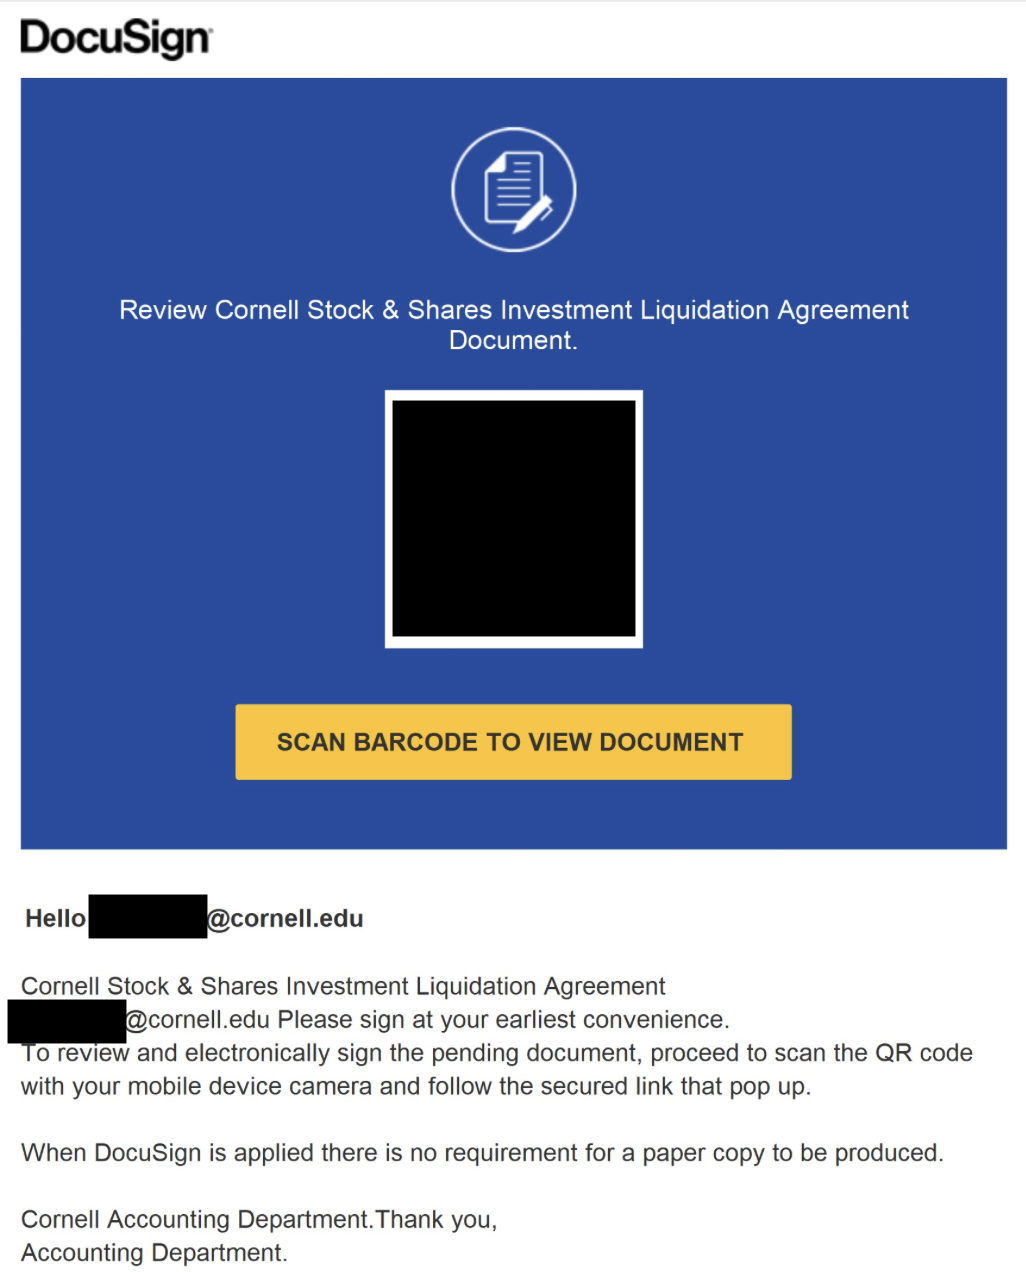 A fake DocuSign-branded notification with the heading "Review Cornell Stock & Shares Investment Liquidation Agreement Document".